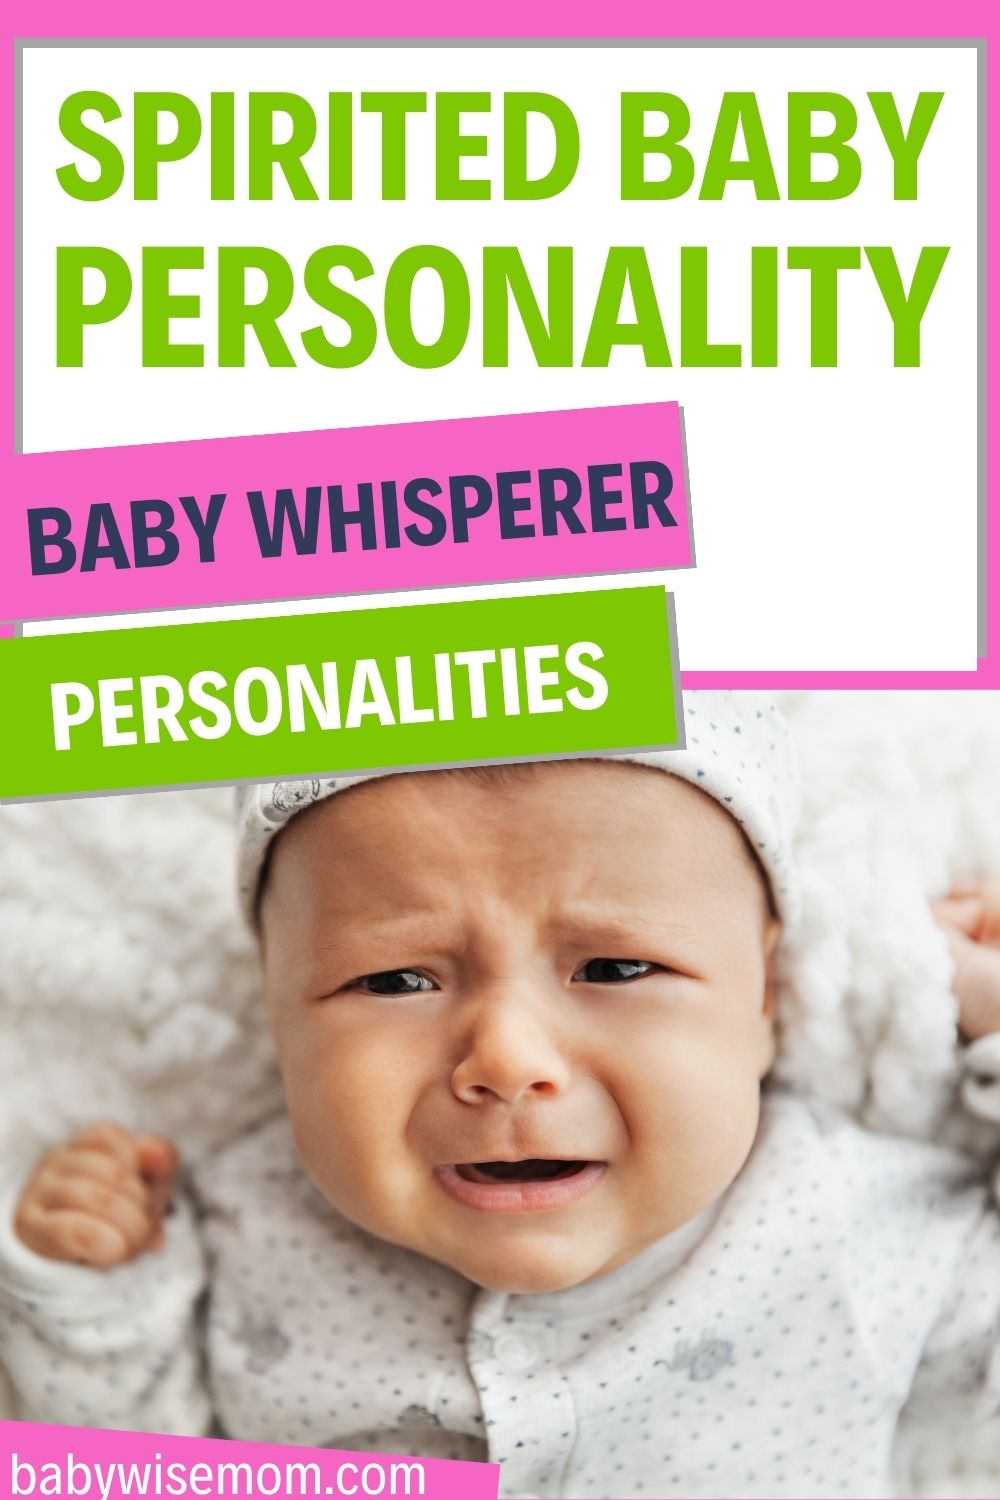 Spirited Baby personality profile